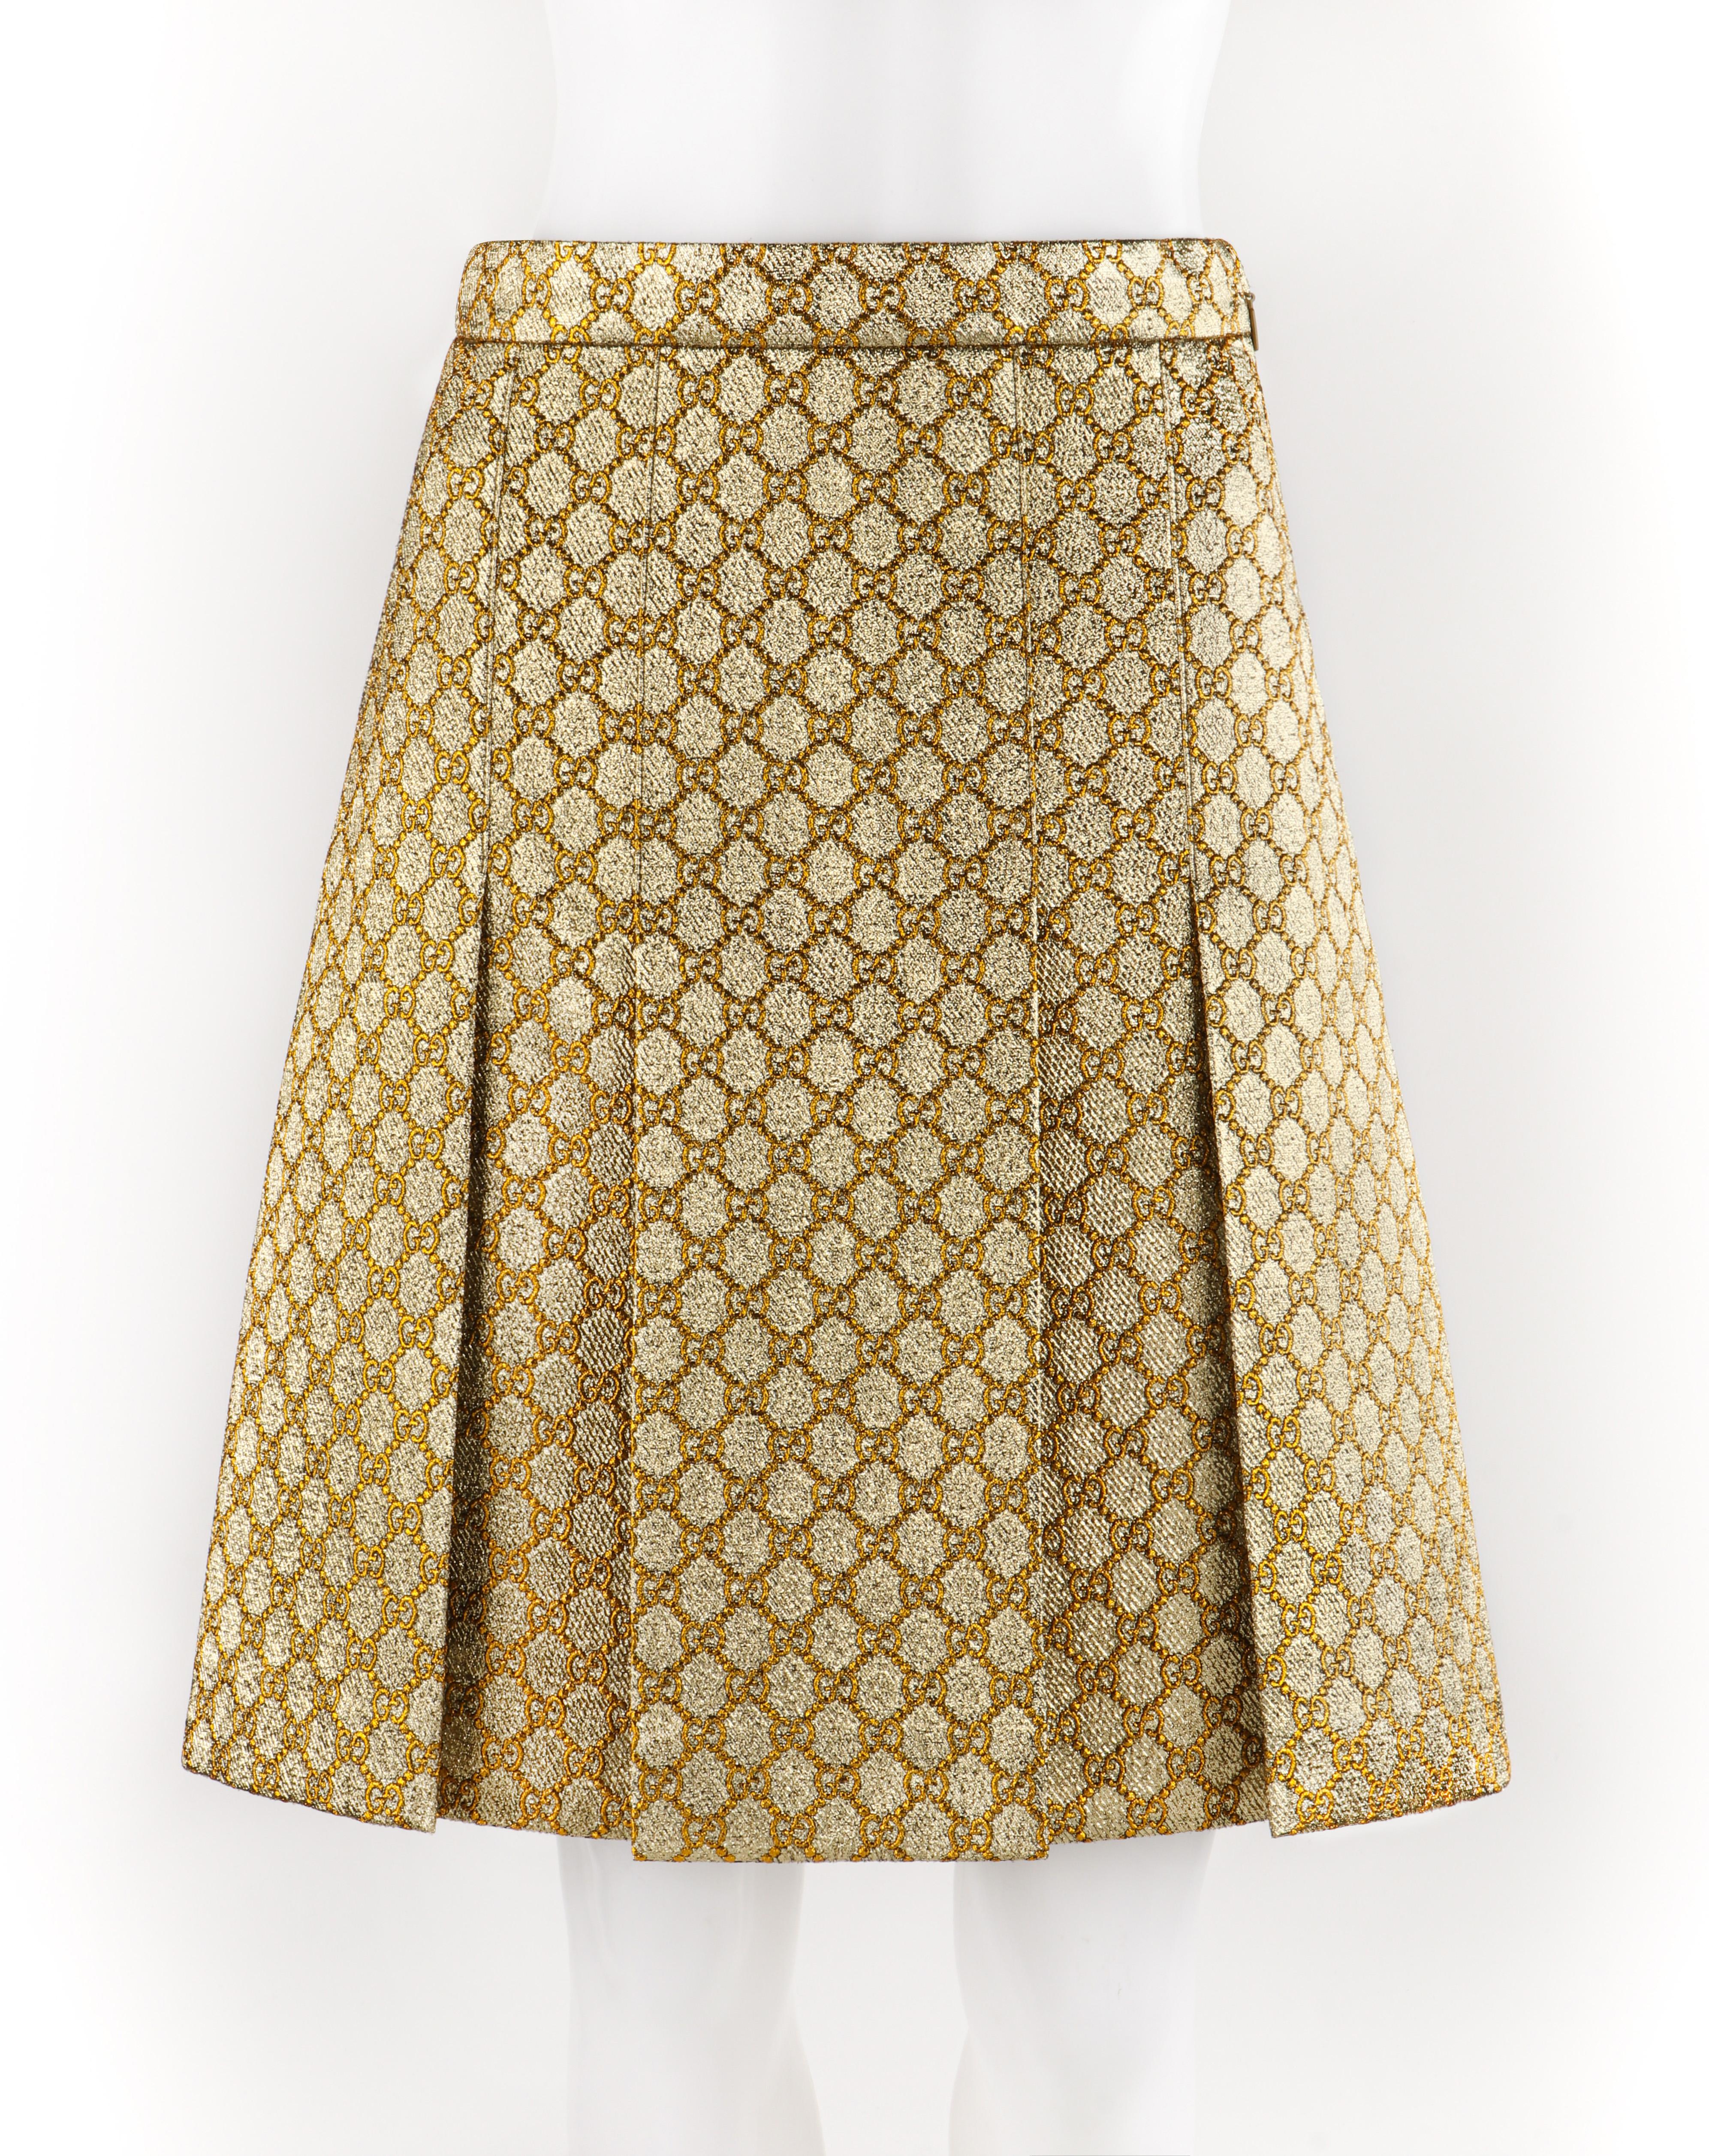 GUCCI S/S 2018 Gold Metallic Brocade Monogram Logo Pleated Knee Length Skirt
 
Brand / Manufacturer: Gucci
Collection: S/S 2018
Style: Pleated Skirt
Color(s): Shades of gold
Lined: Yes
Marked Fabric Content: 34% metallized polyester, 22% cotton, 20%